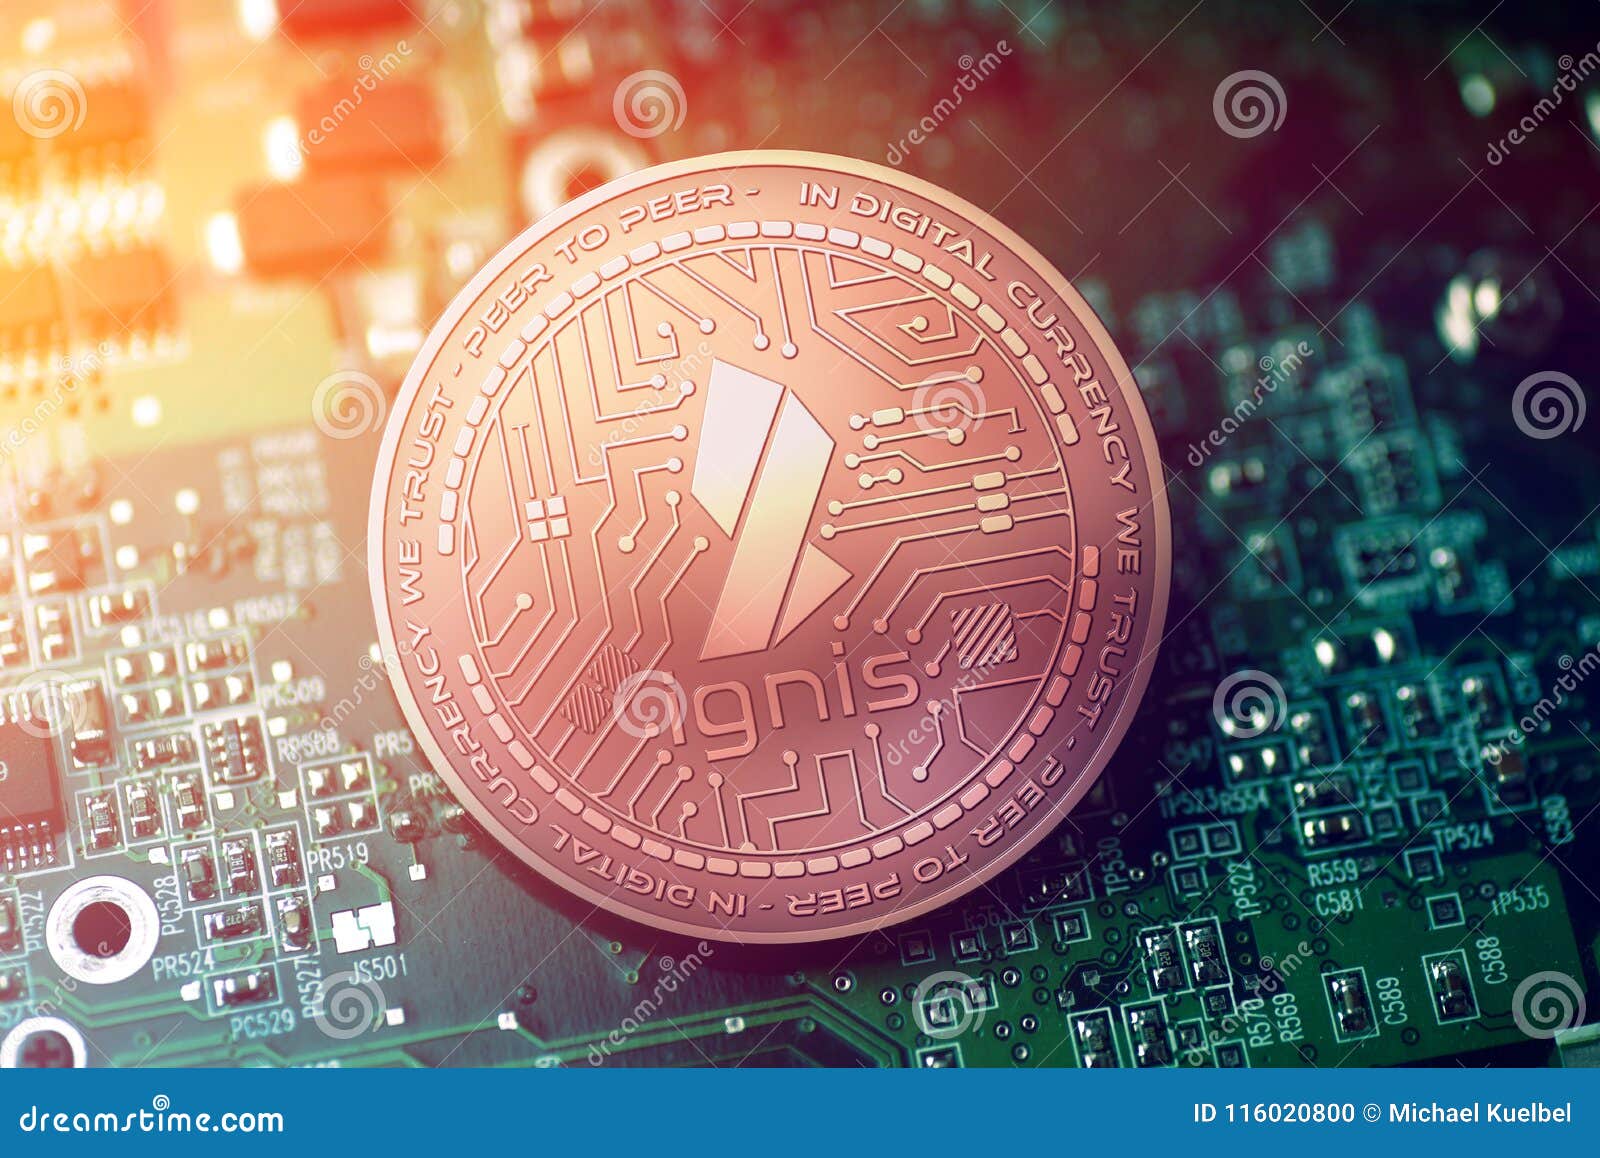 shiny copper ignis cryptocurrency coin on blurry motherboard background